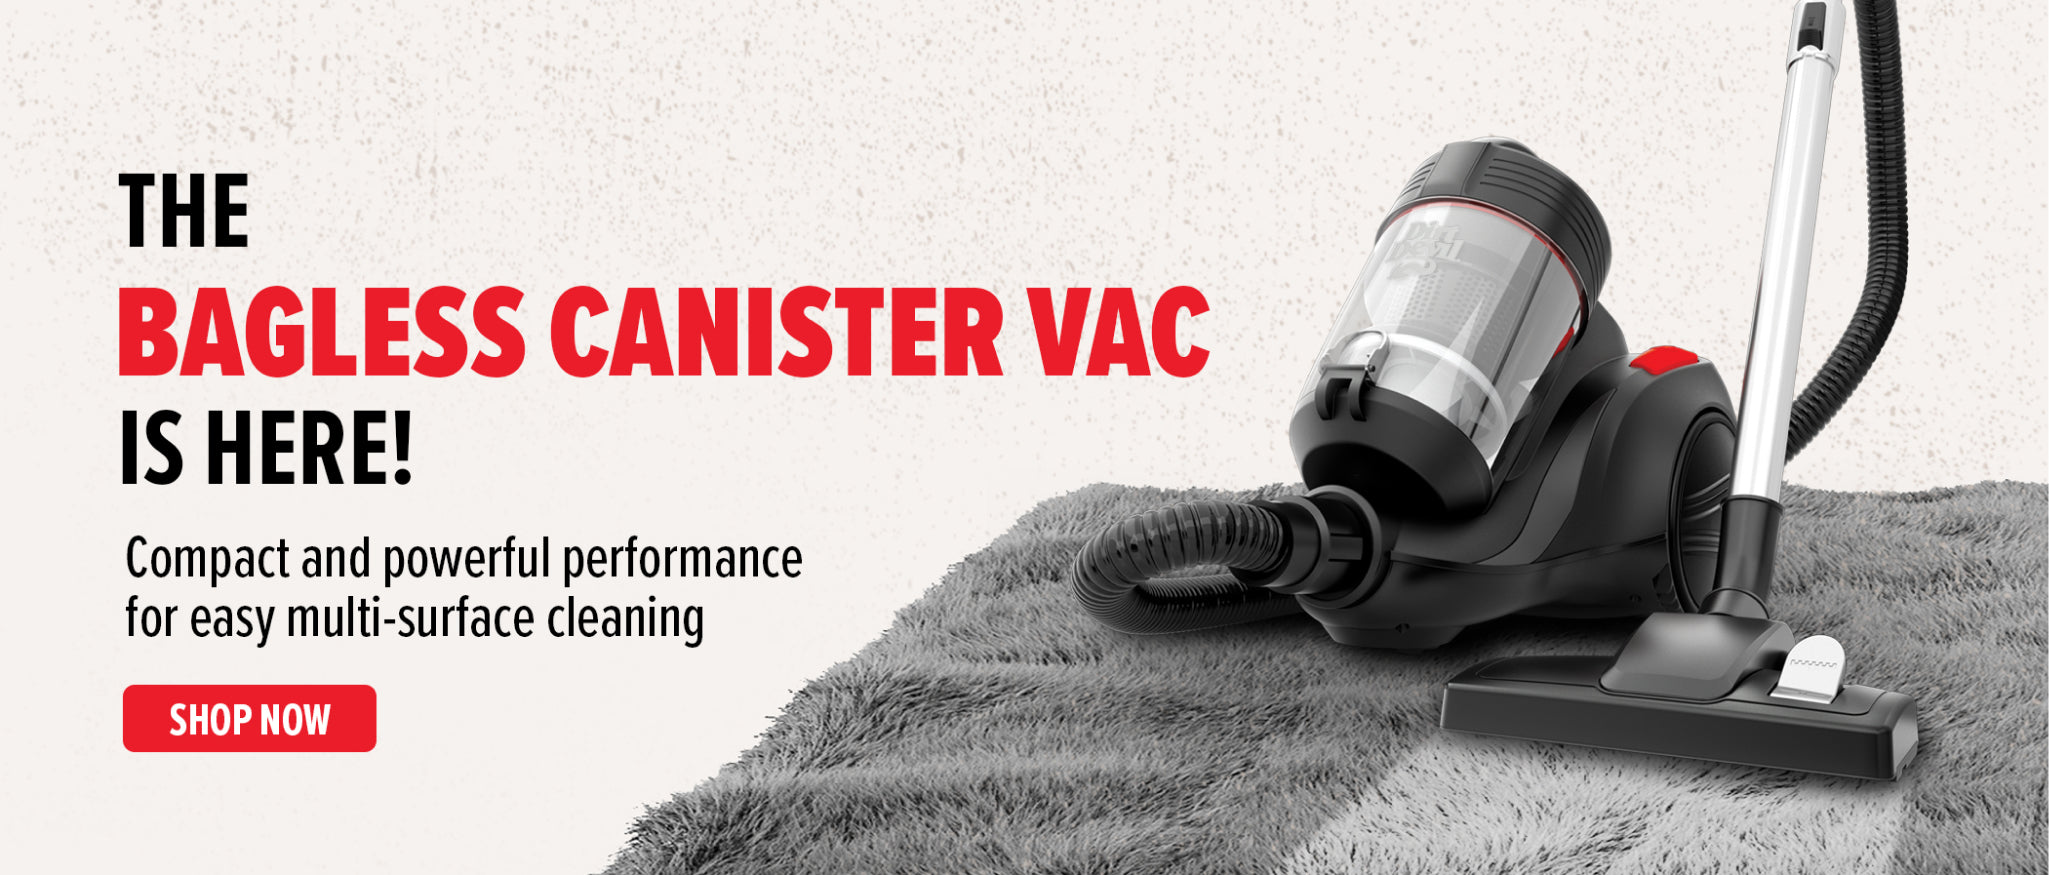 The bagless Canister vac is here! Compact and powerful performance for easy multi-surface cleaning! 